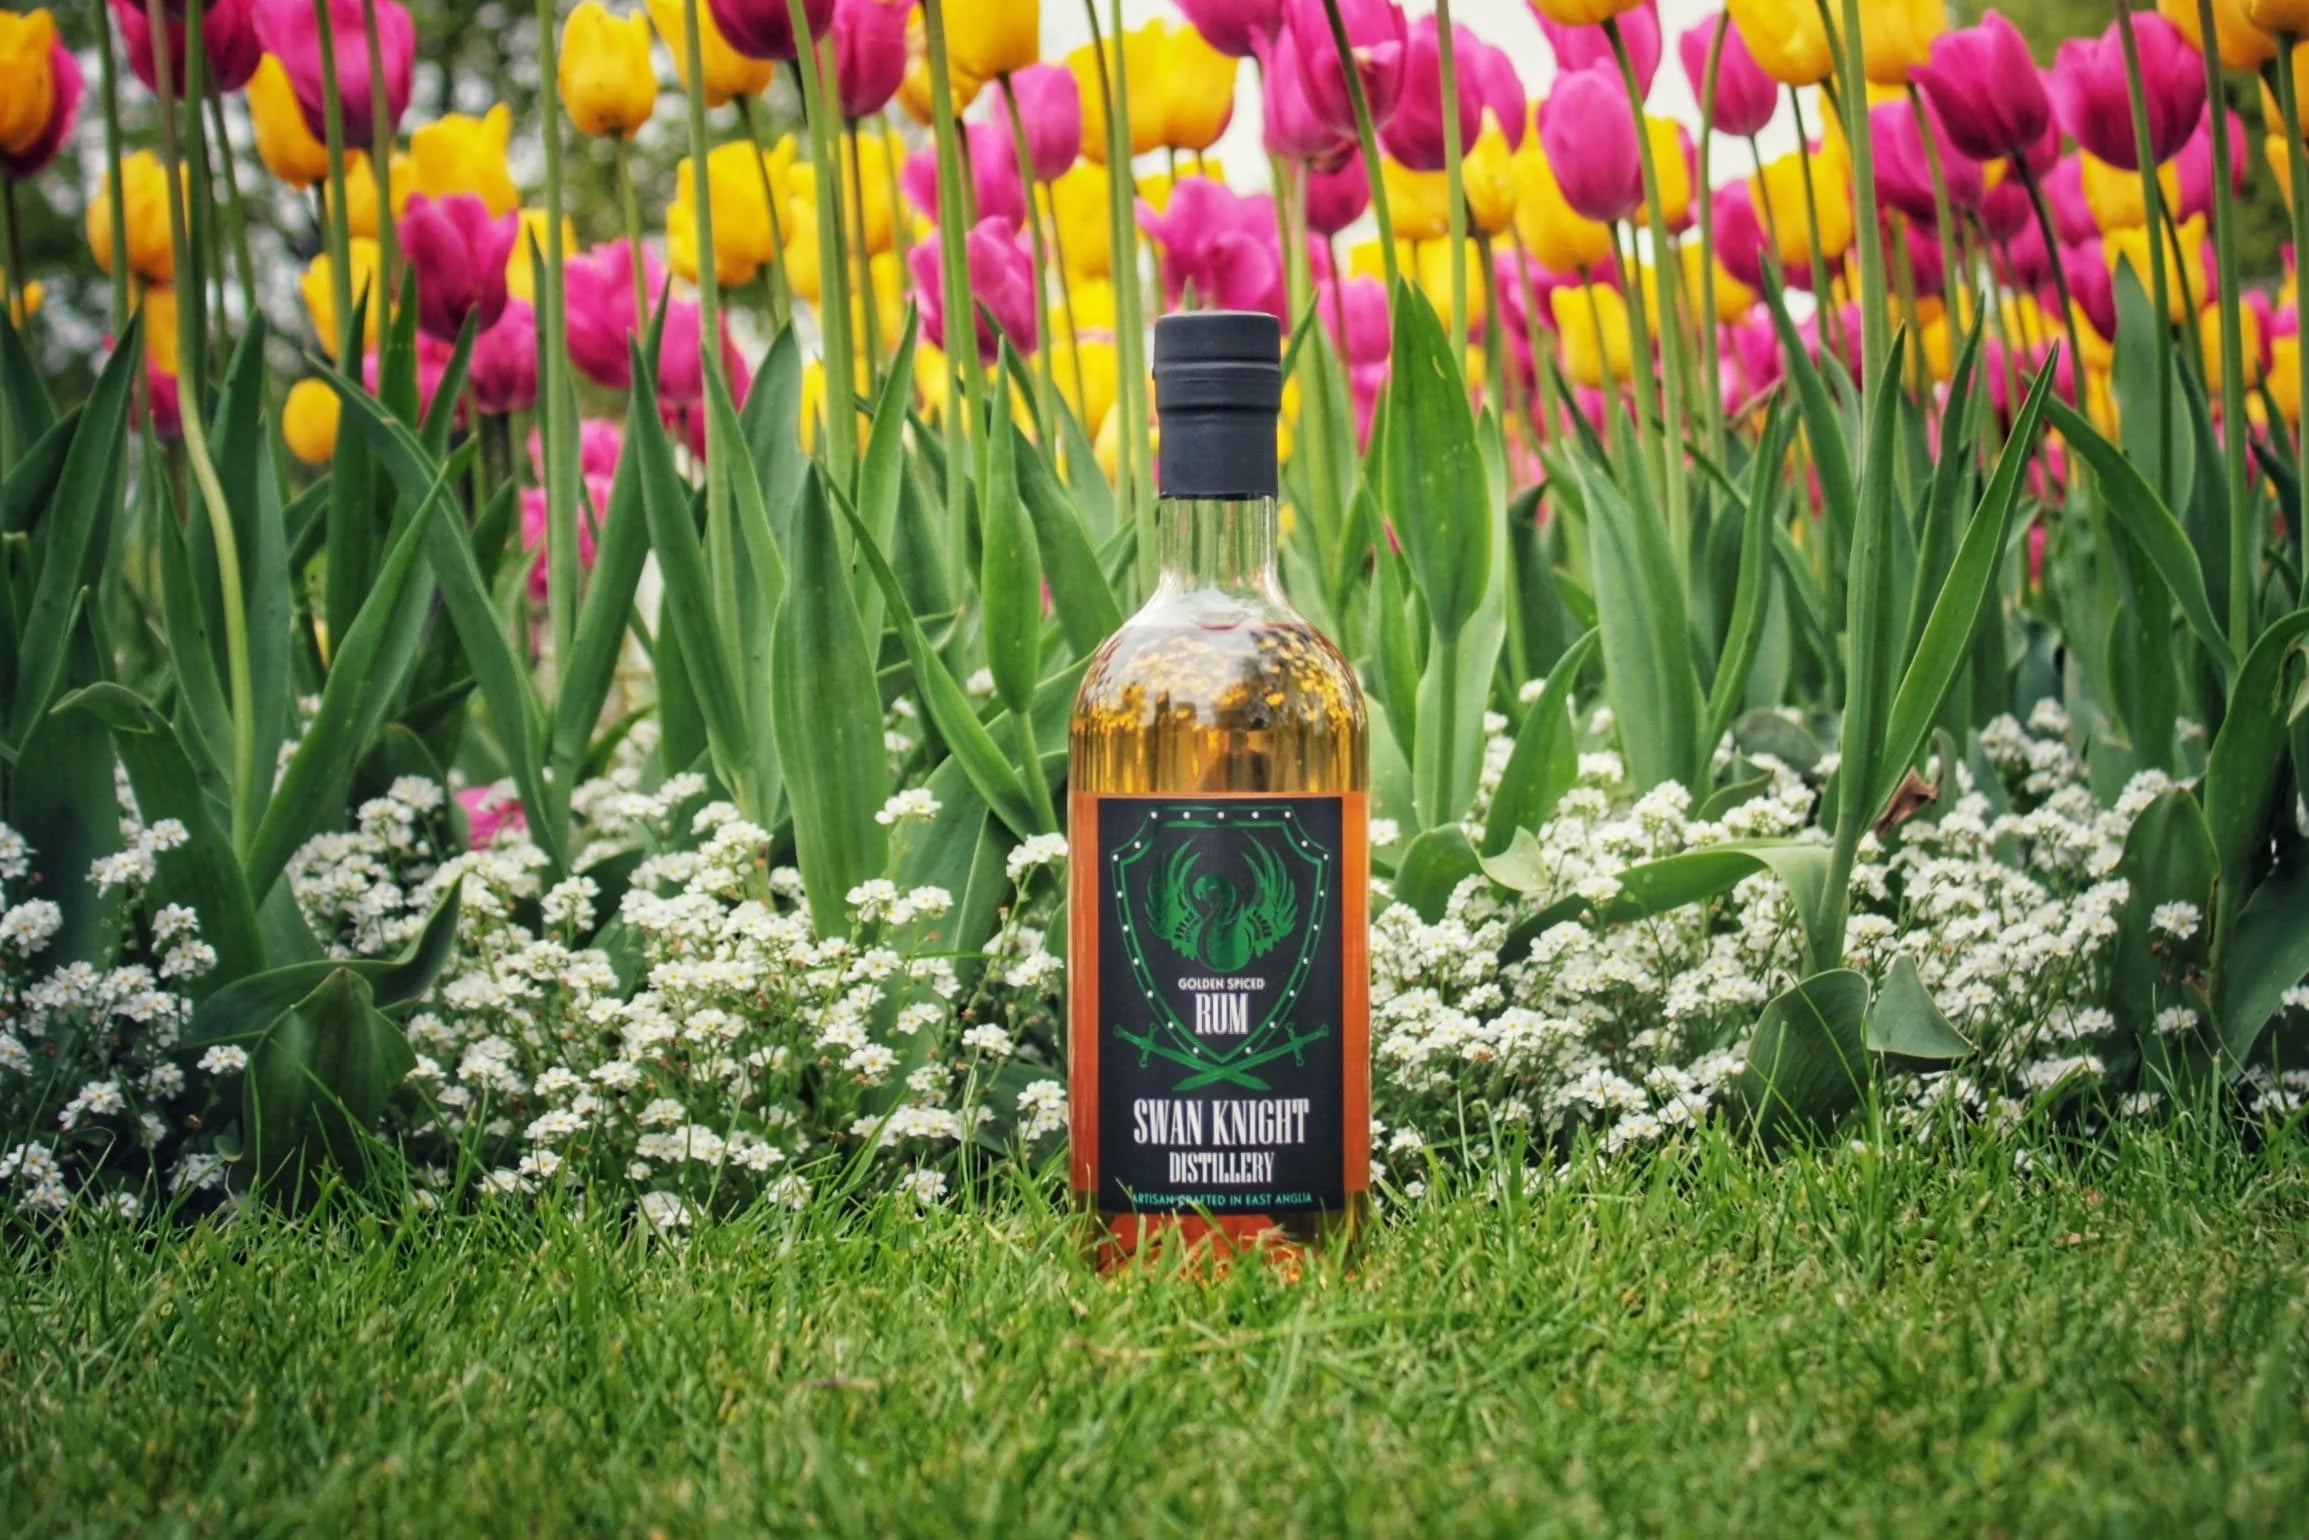 Bottle of Swan Knight Distillery golden spiced rum with a back drop of tulips